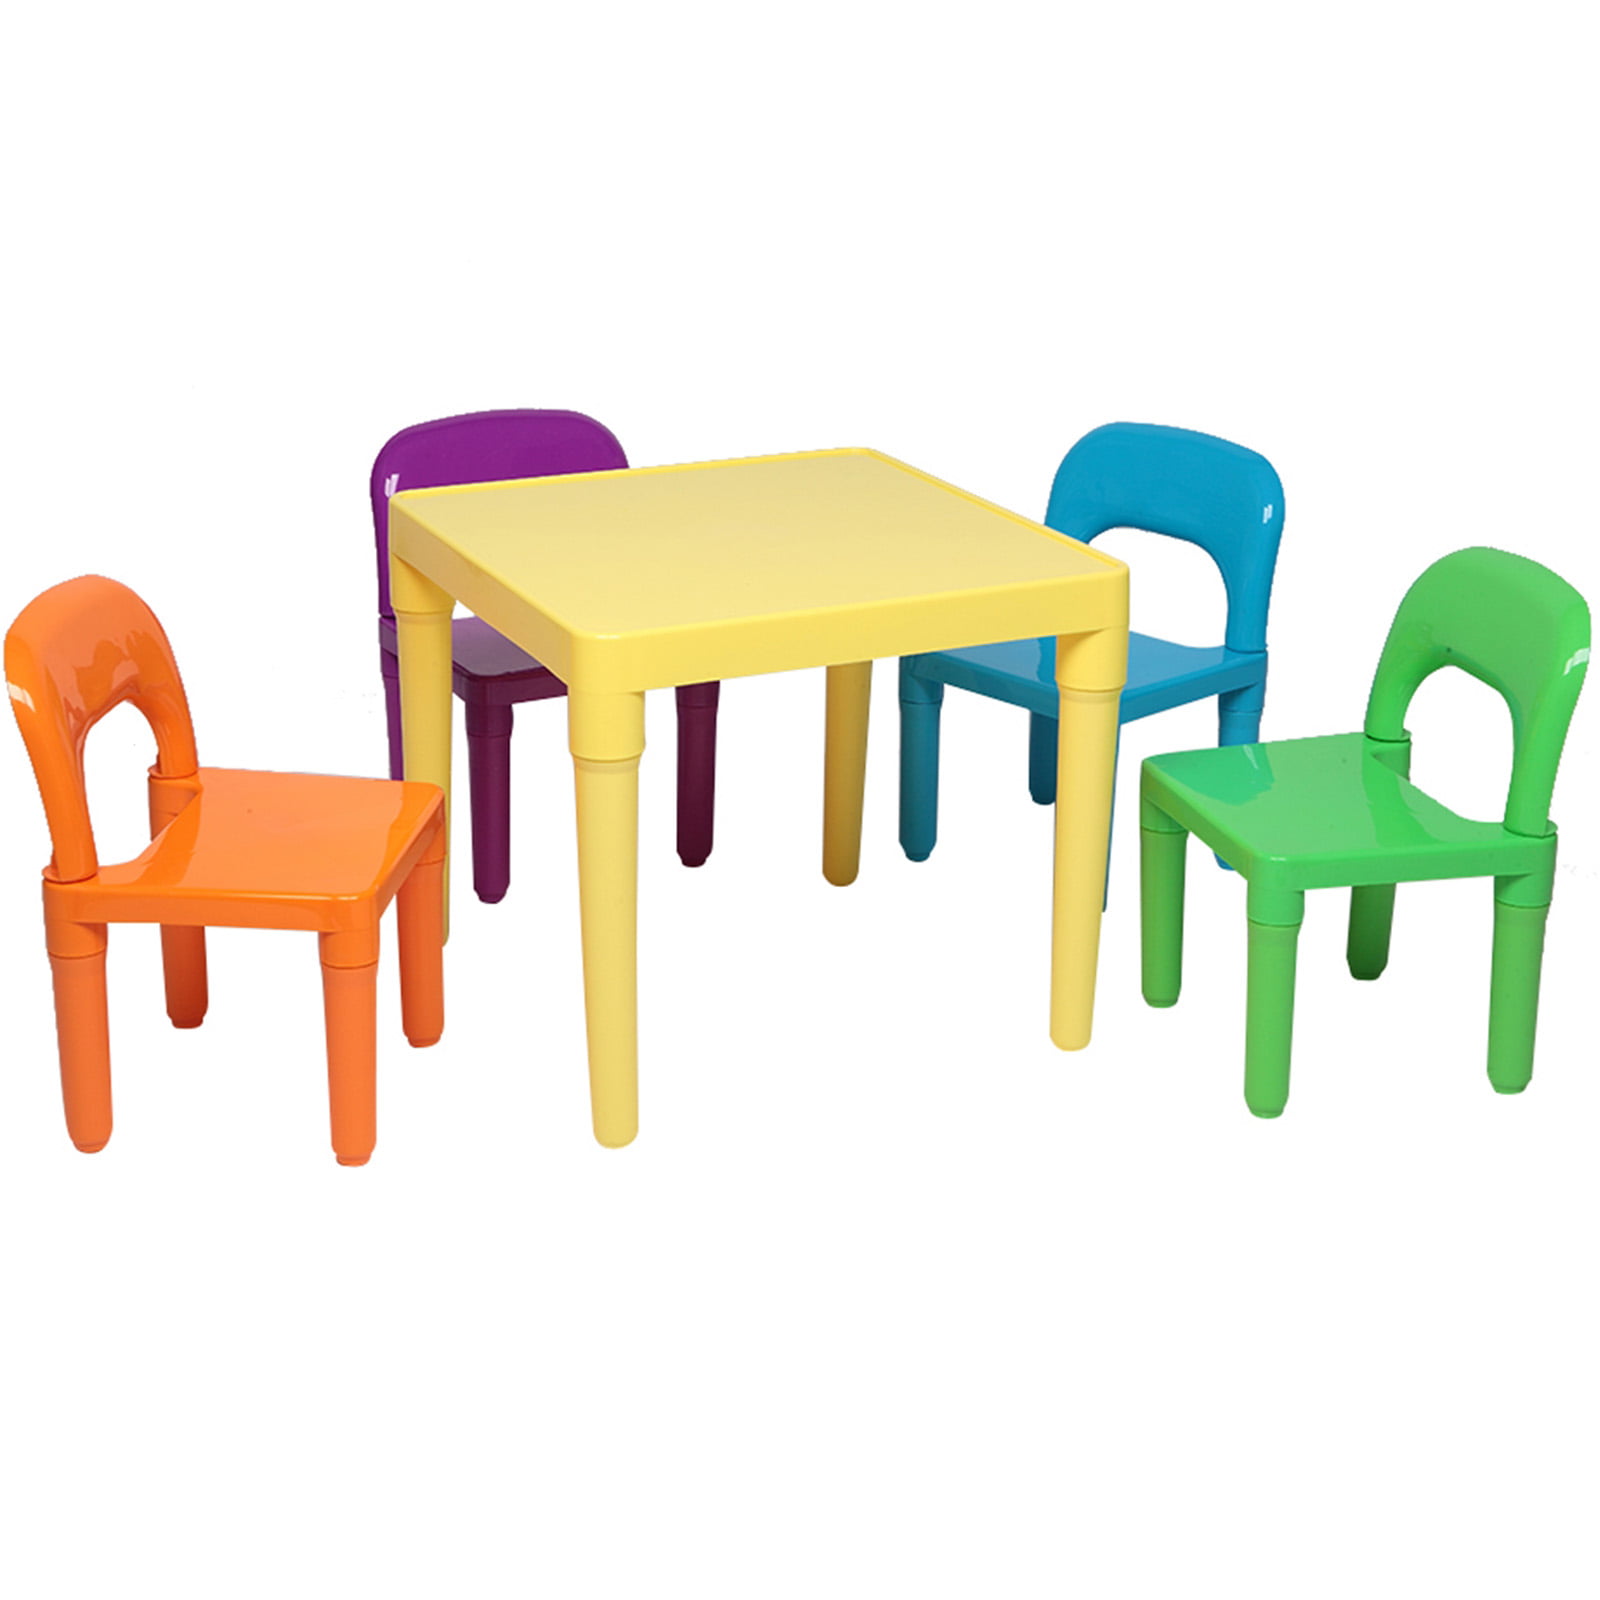 Details about   Kids Table Sturdy Chairs Set Storage Activity Desk Playroom Furniture Paw Patrol 